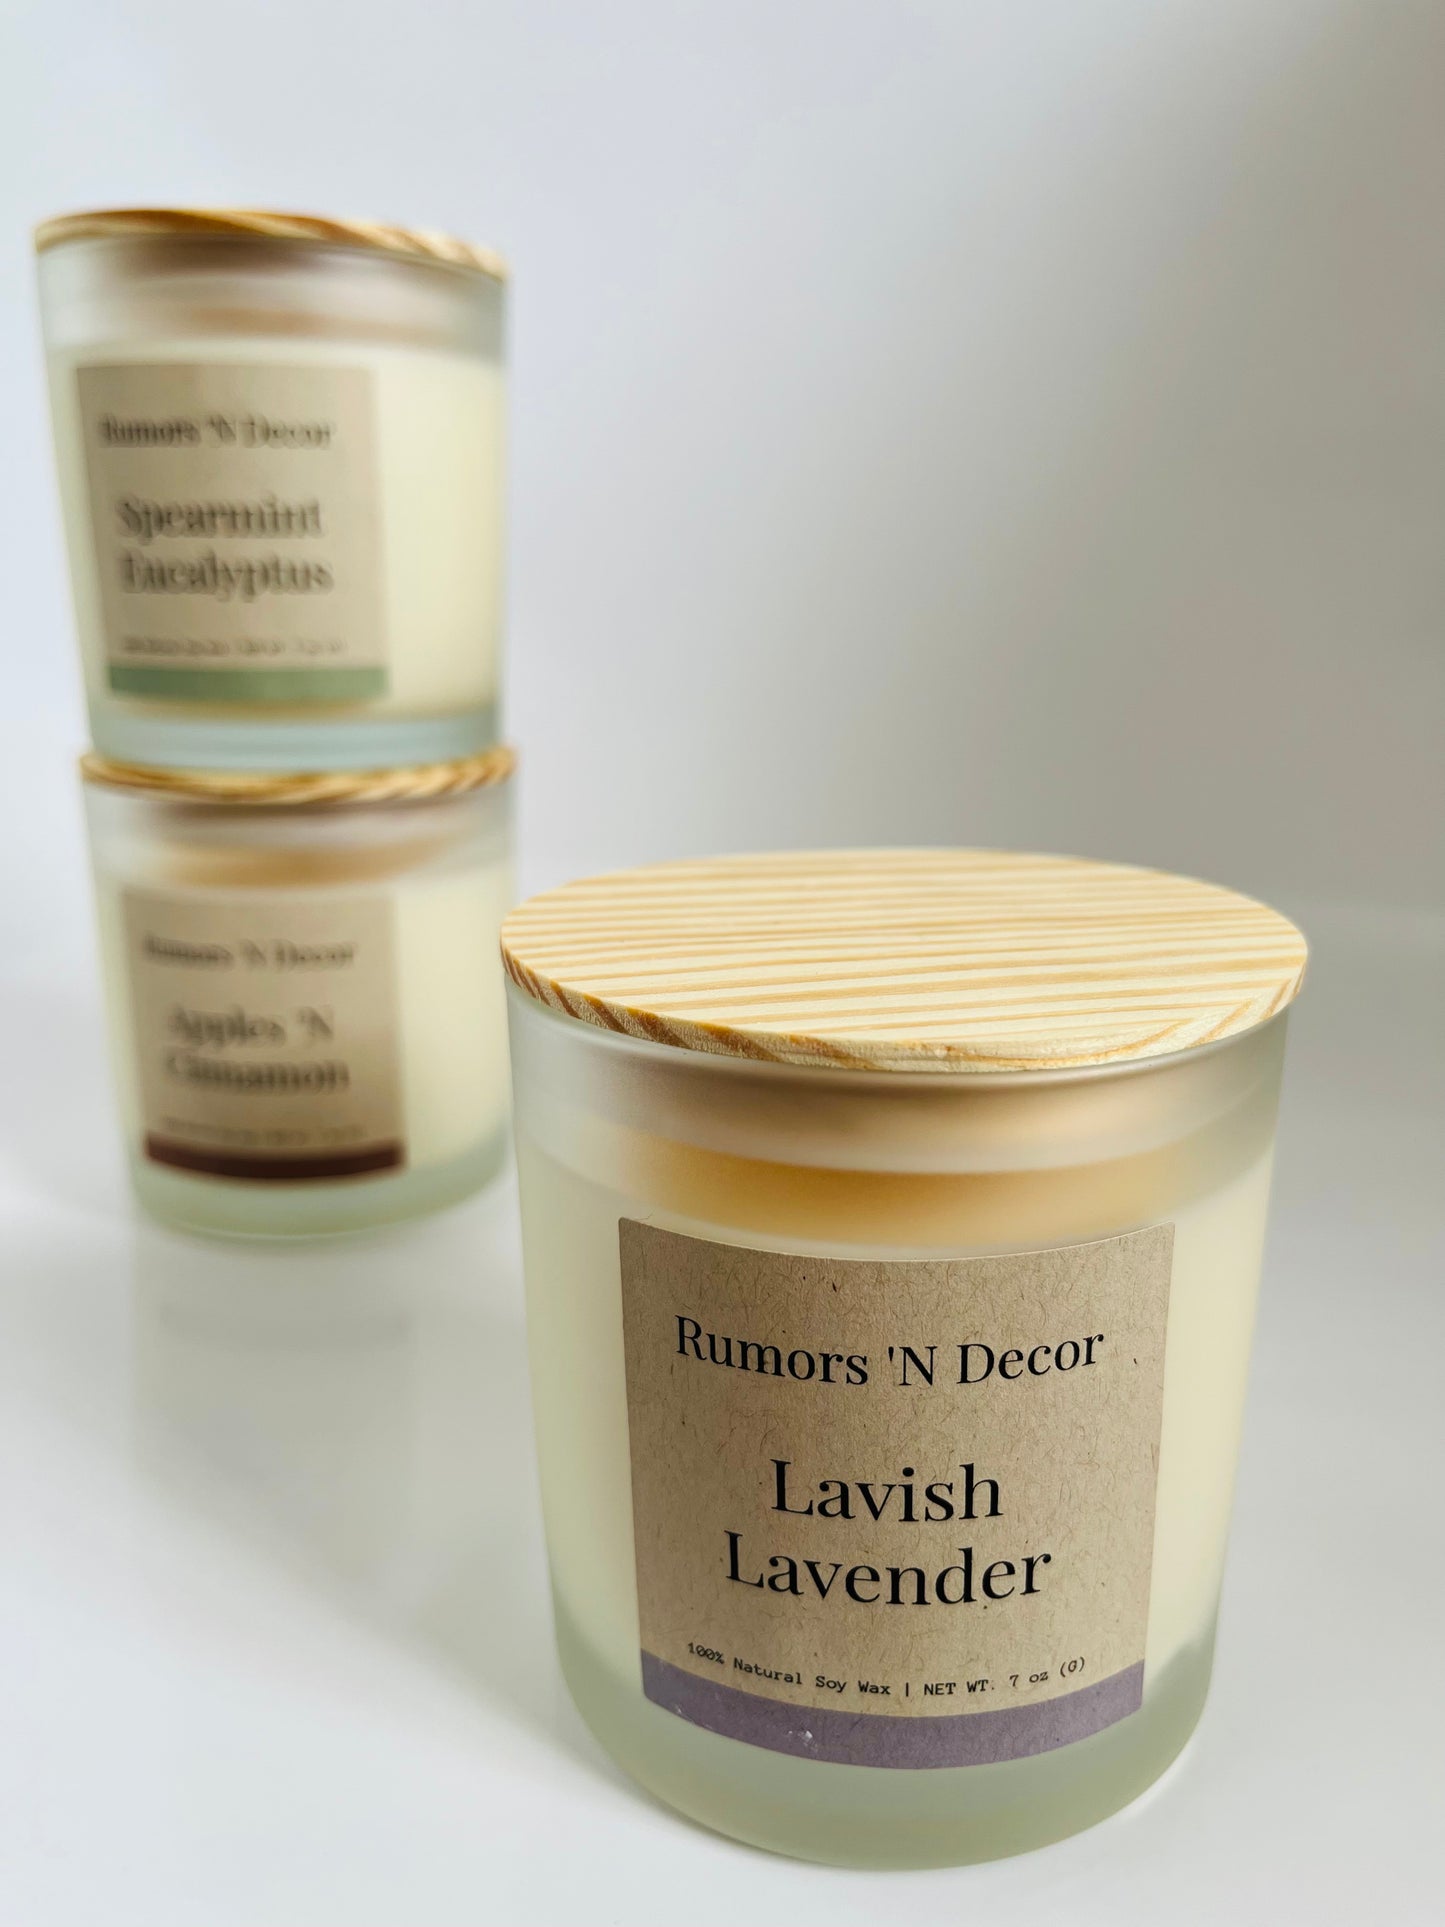 Permanent Collection Candles